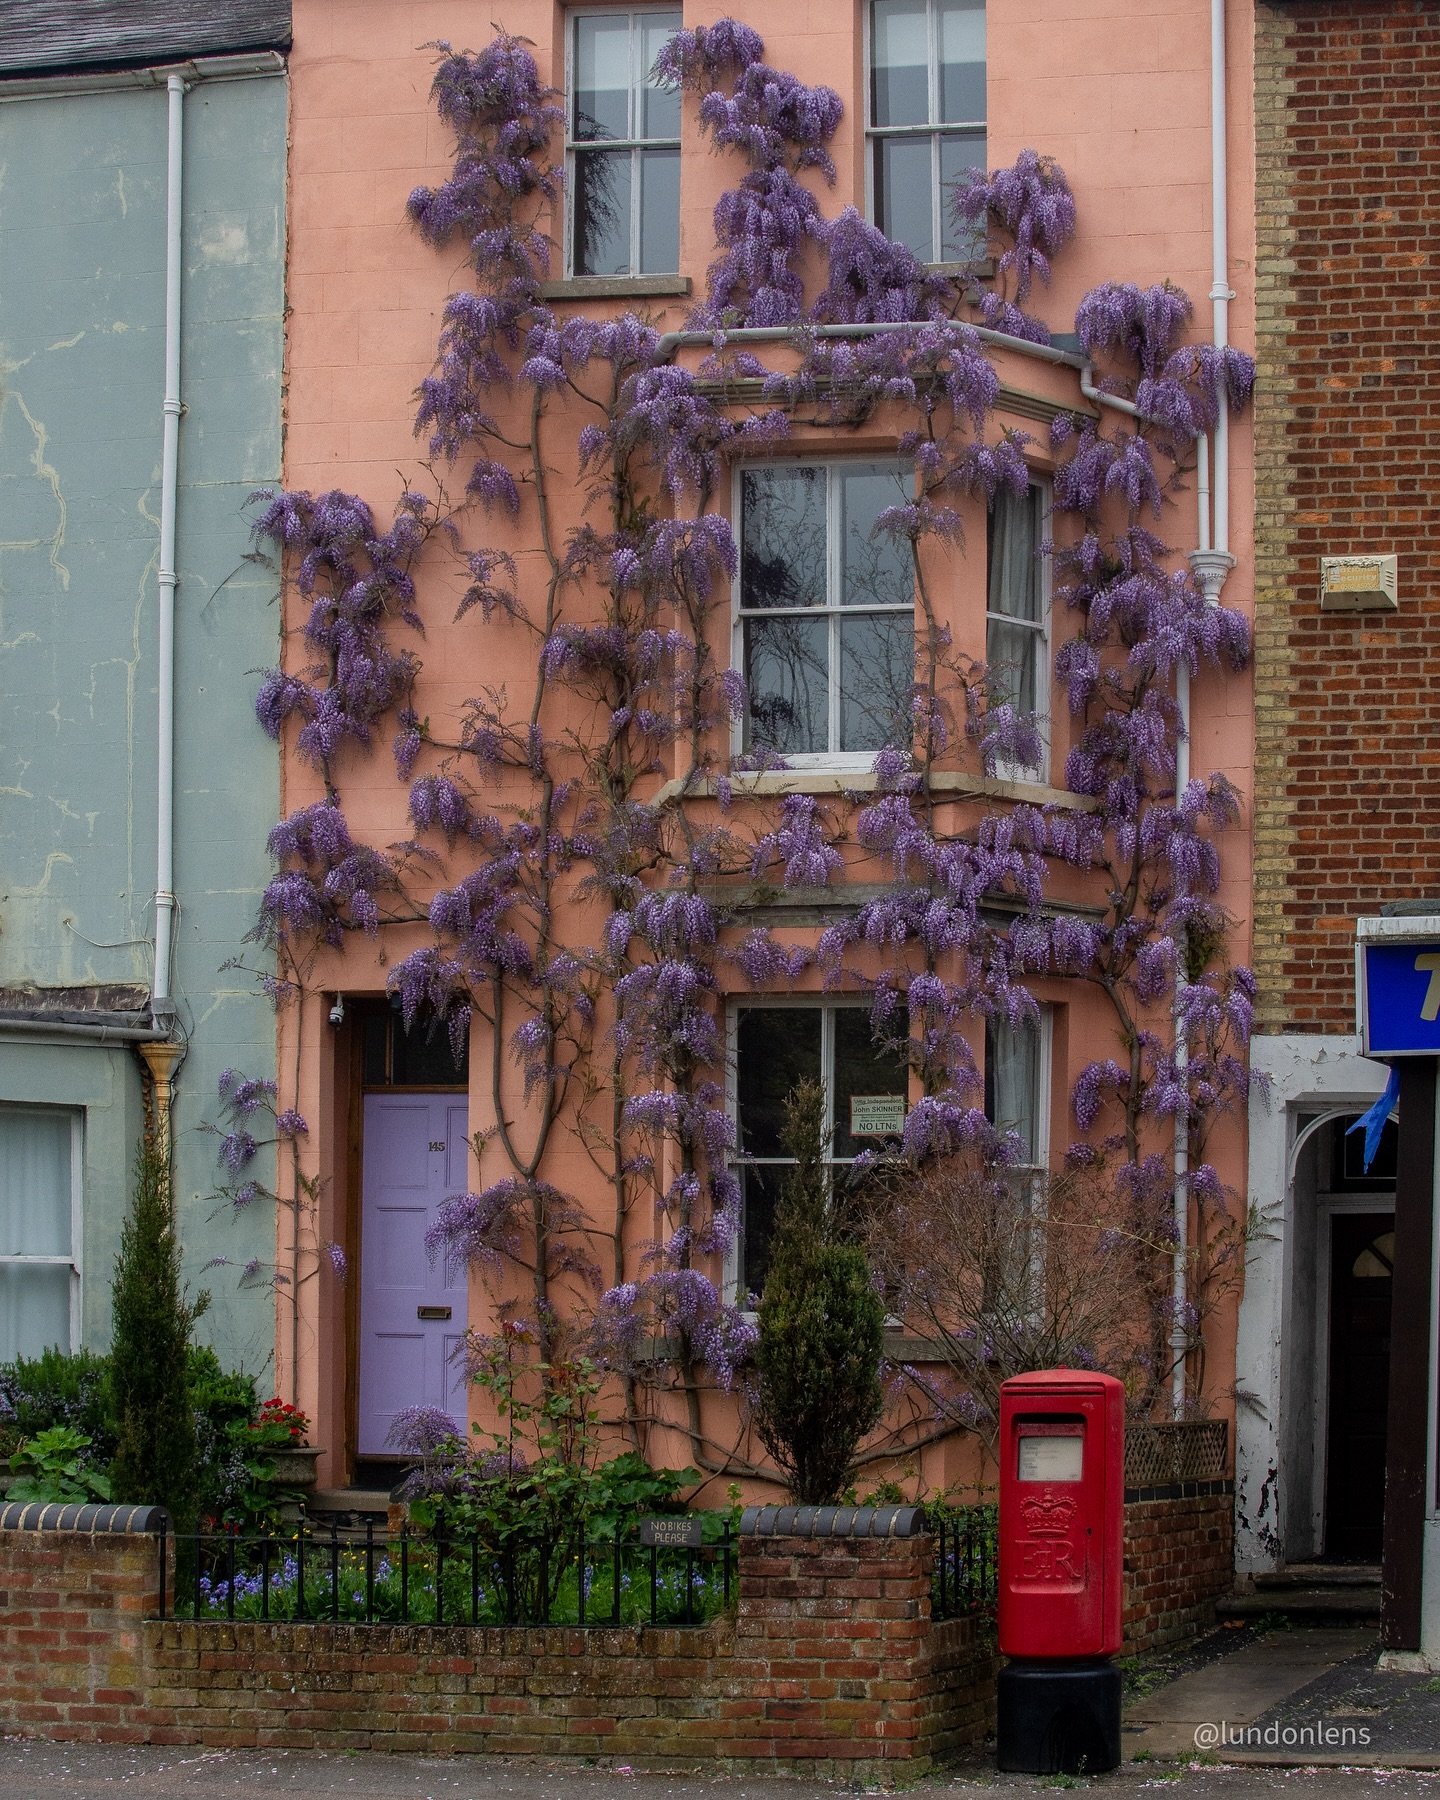 🧡💜🧡💜 The Orange and purple looks good on this house in Oxford 😍🏴󠁧󠁢󠁥󠁮󠁧󠁿
&bull;
&bull;
#oxford #oxfordshire #oxfordcity #wisteria #wisteriaflowers #house #houses #houses_phototrip #wisteriahysteria #garden #gardening #gardendesign #lundonle